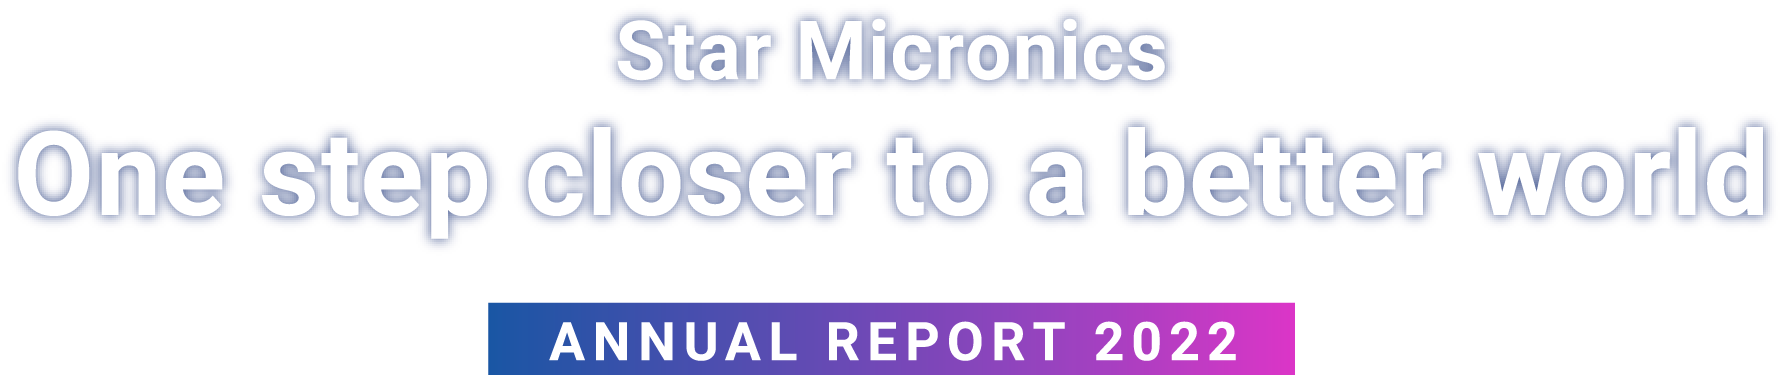 Star Micronics One step closer to a better world ANNUAL REPORT 2022